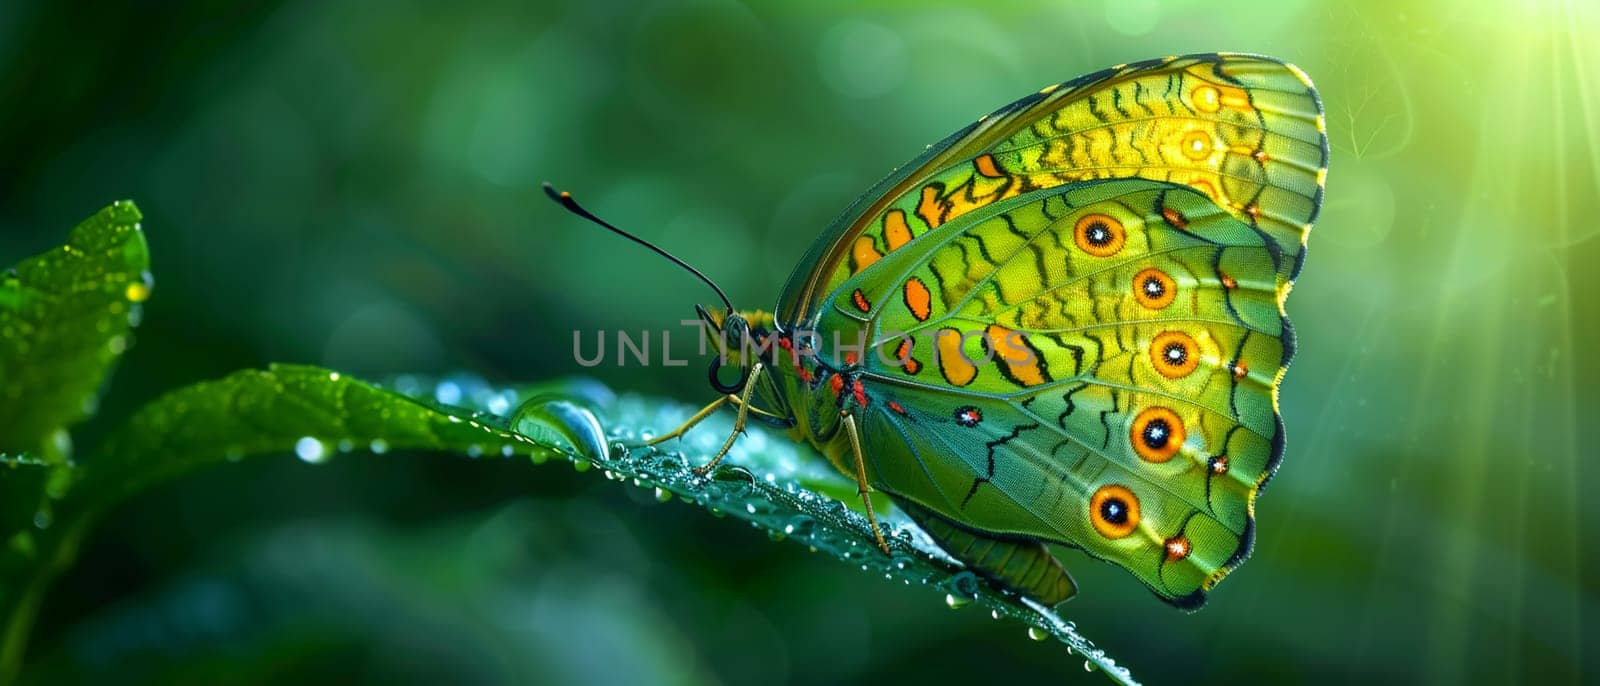 Macro shot of a butterfly emerging from a chrysalis, representing transformation and renewal